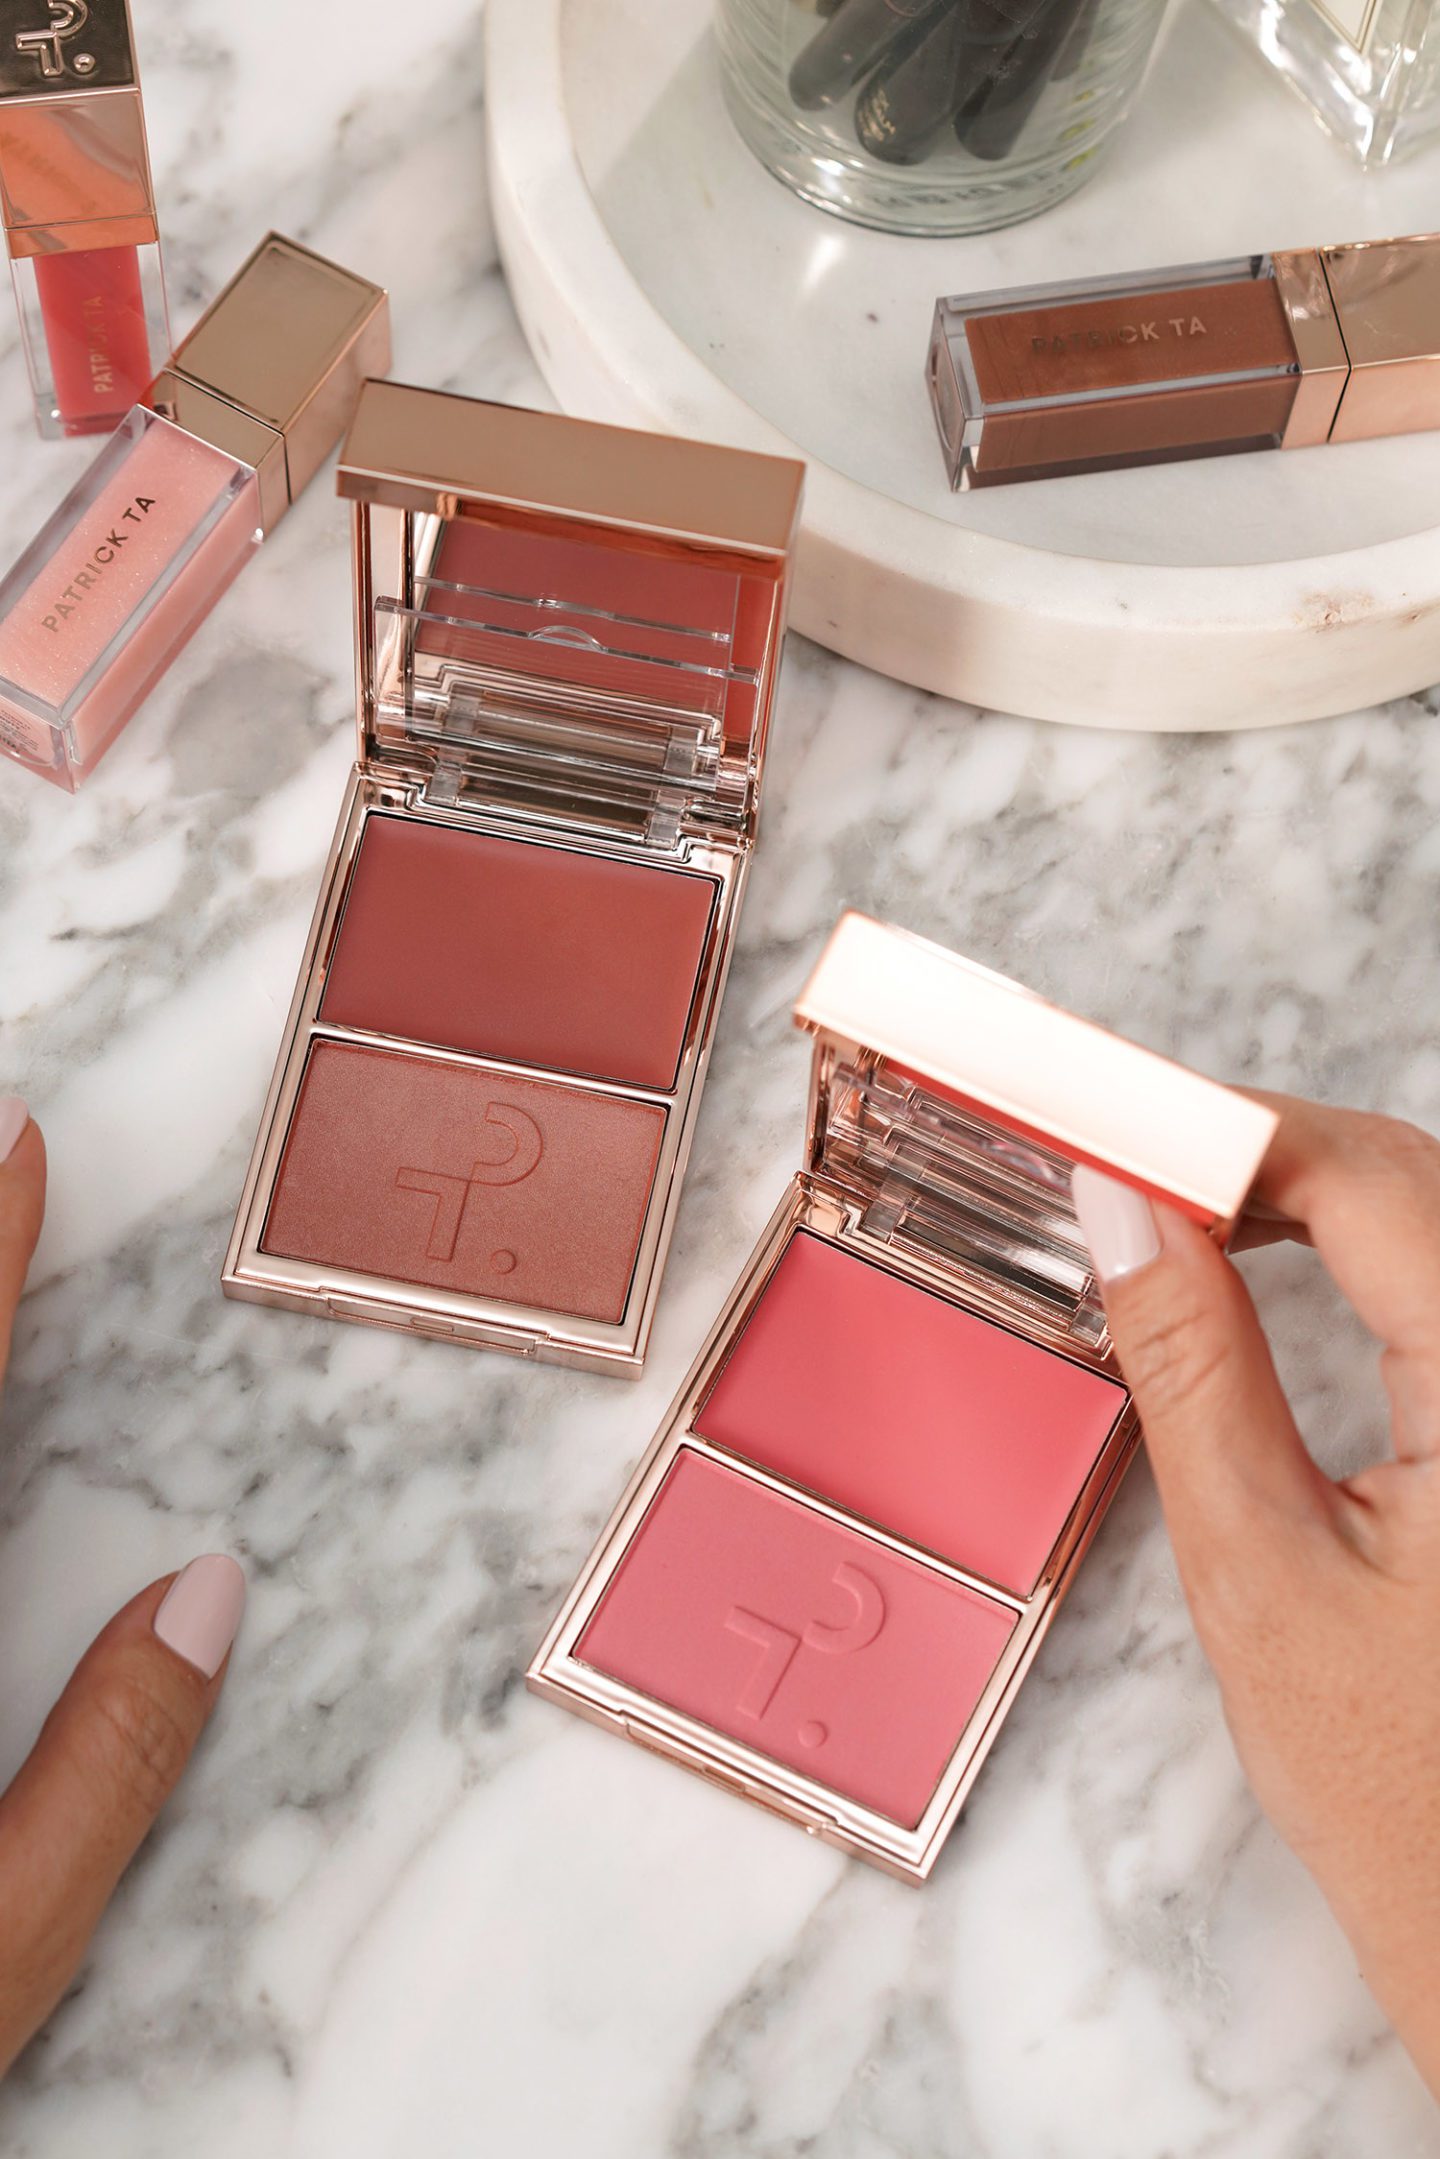 Patrick TA Major Beauty Headlines Double-Take Crème and Powder Blush in She's Blushing and She's That Girl